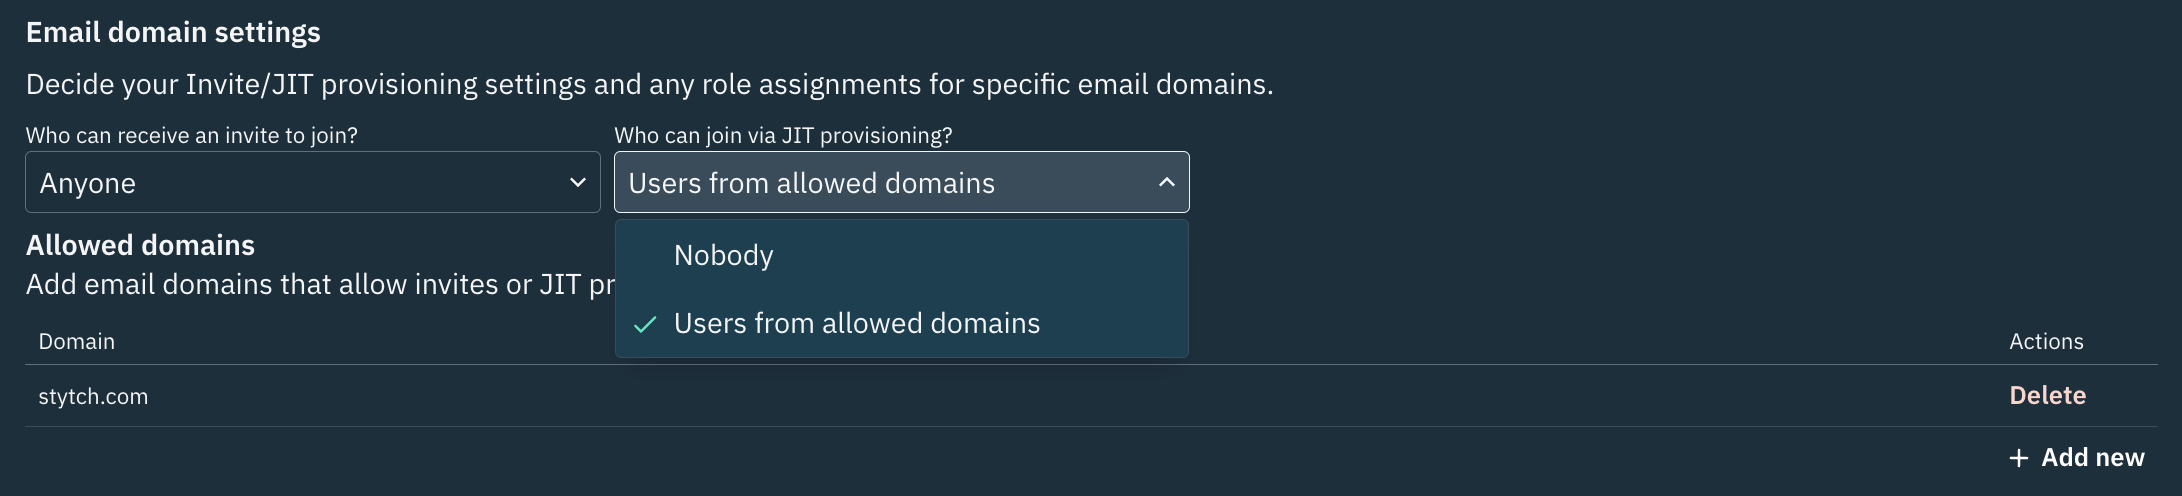 Dashboard page for configuring JIT Provisioning by email domain